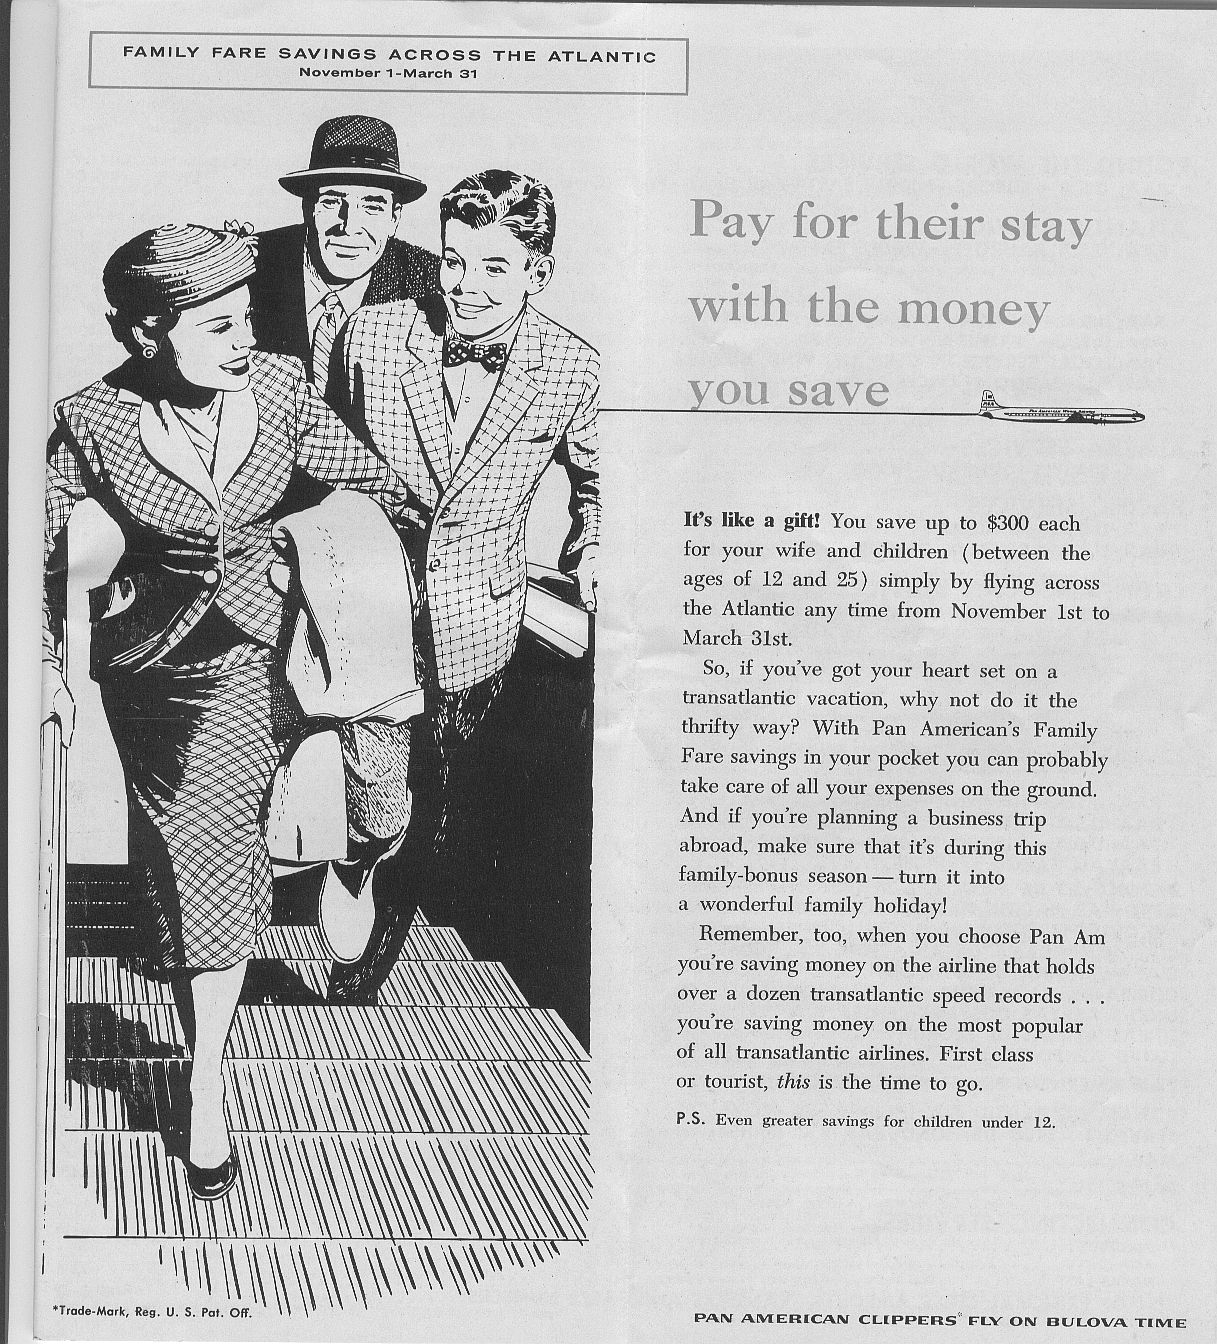 1957 A Pan American ad promoting family travel.